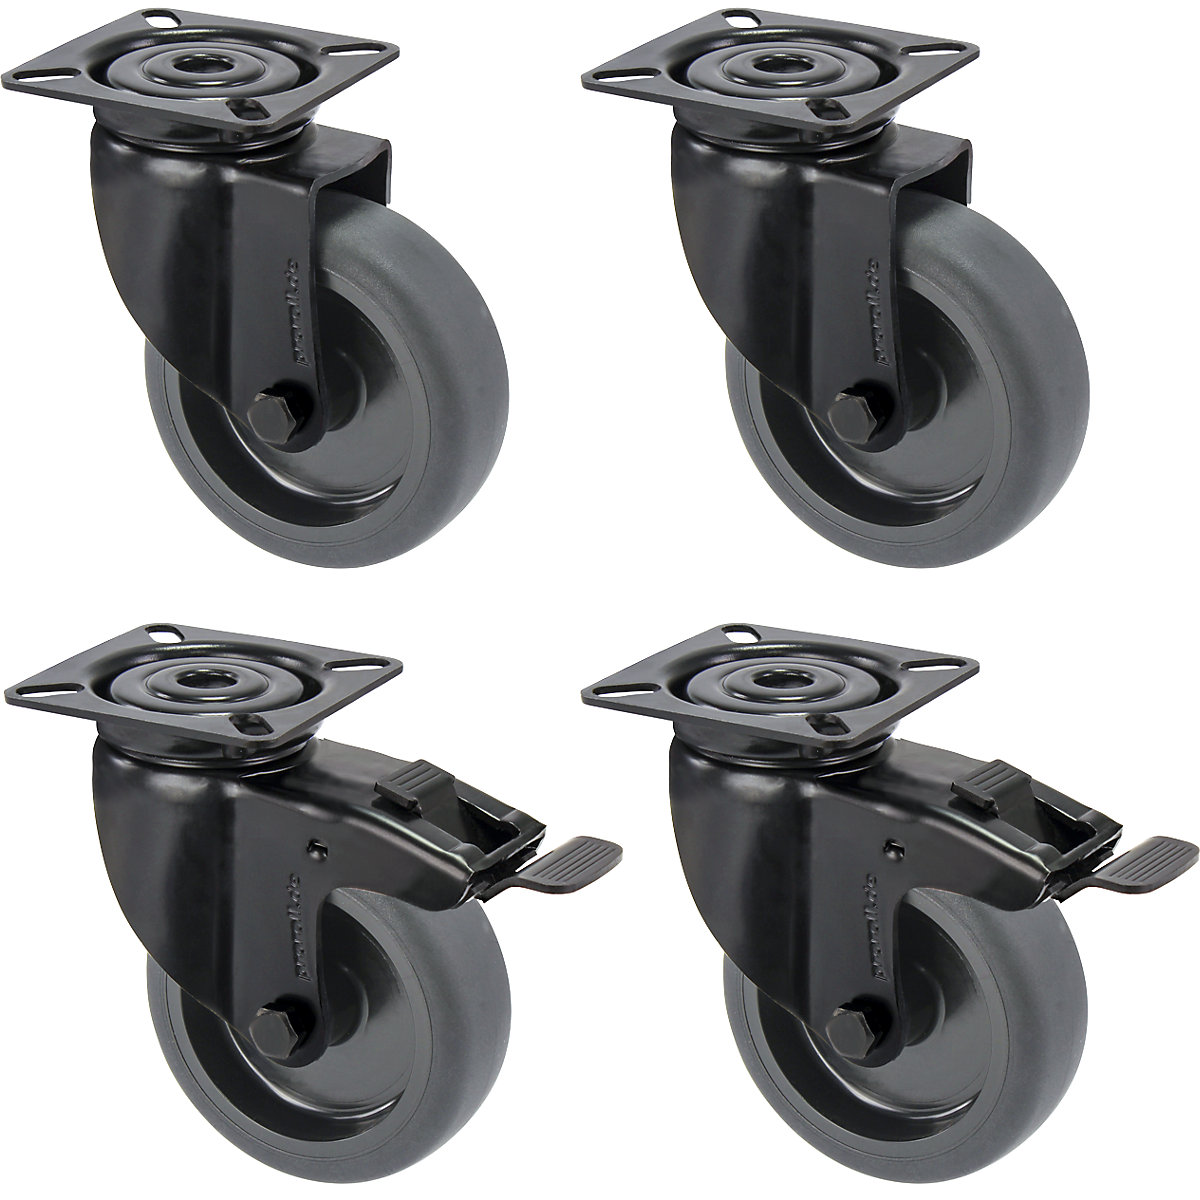 Black rubber tyre, thermoplastic, with mounting plate, offered as a set – Proroll, 2 swivel castors with double stops and 2 swivel castors, wheel Ø x width 100 x 25 mm-2